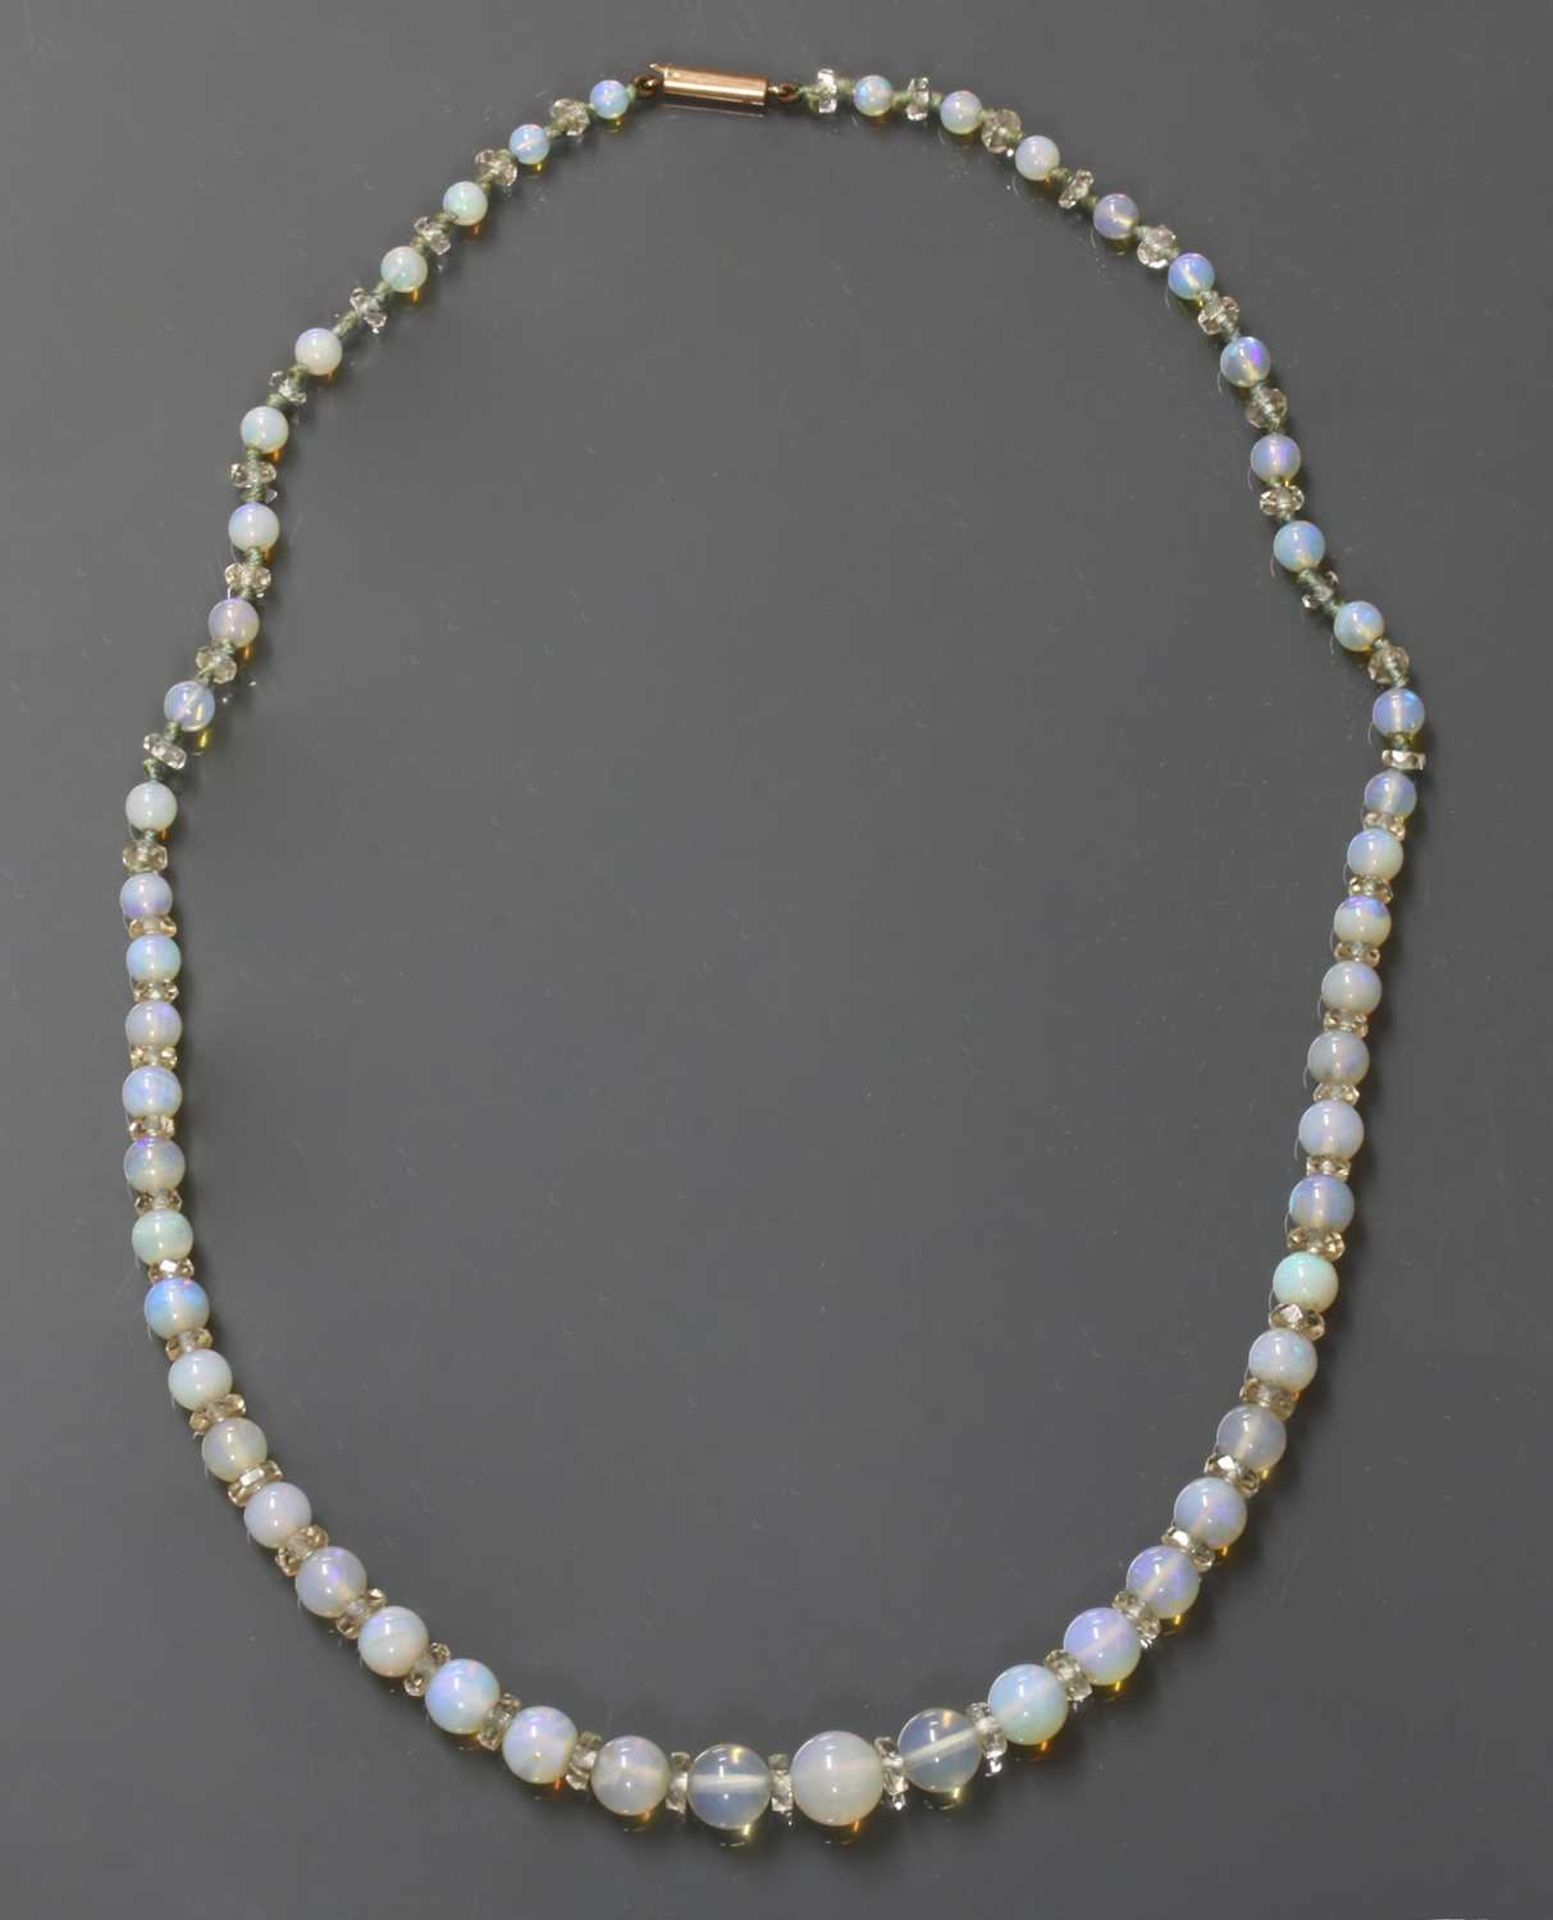 A single row graduated opal and glass bead necklace, - Image 3 of 3